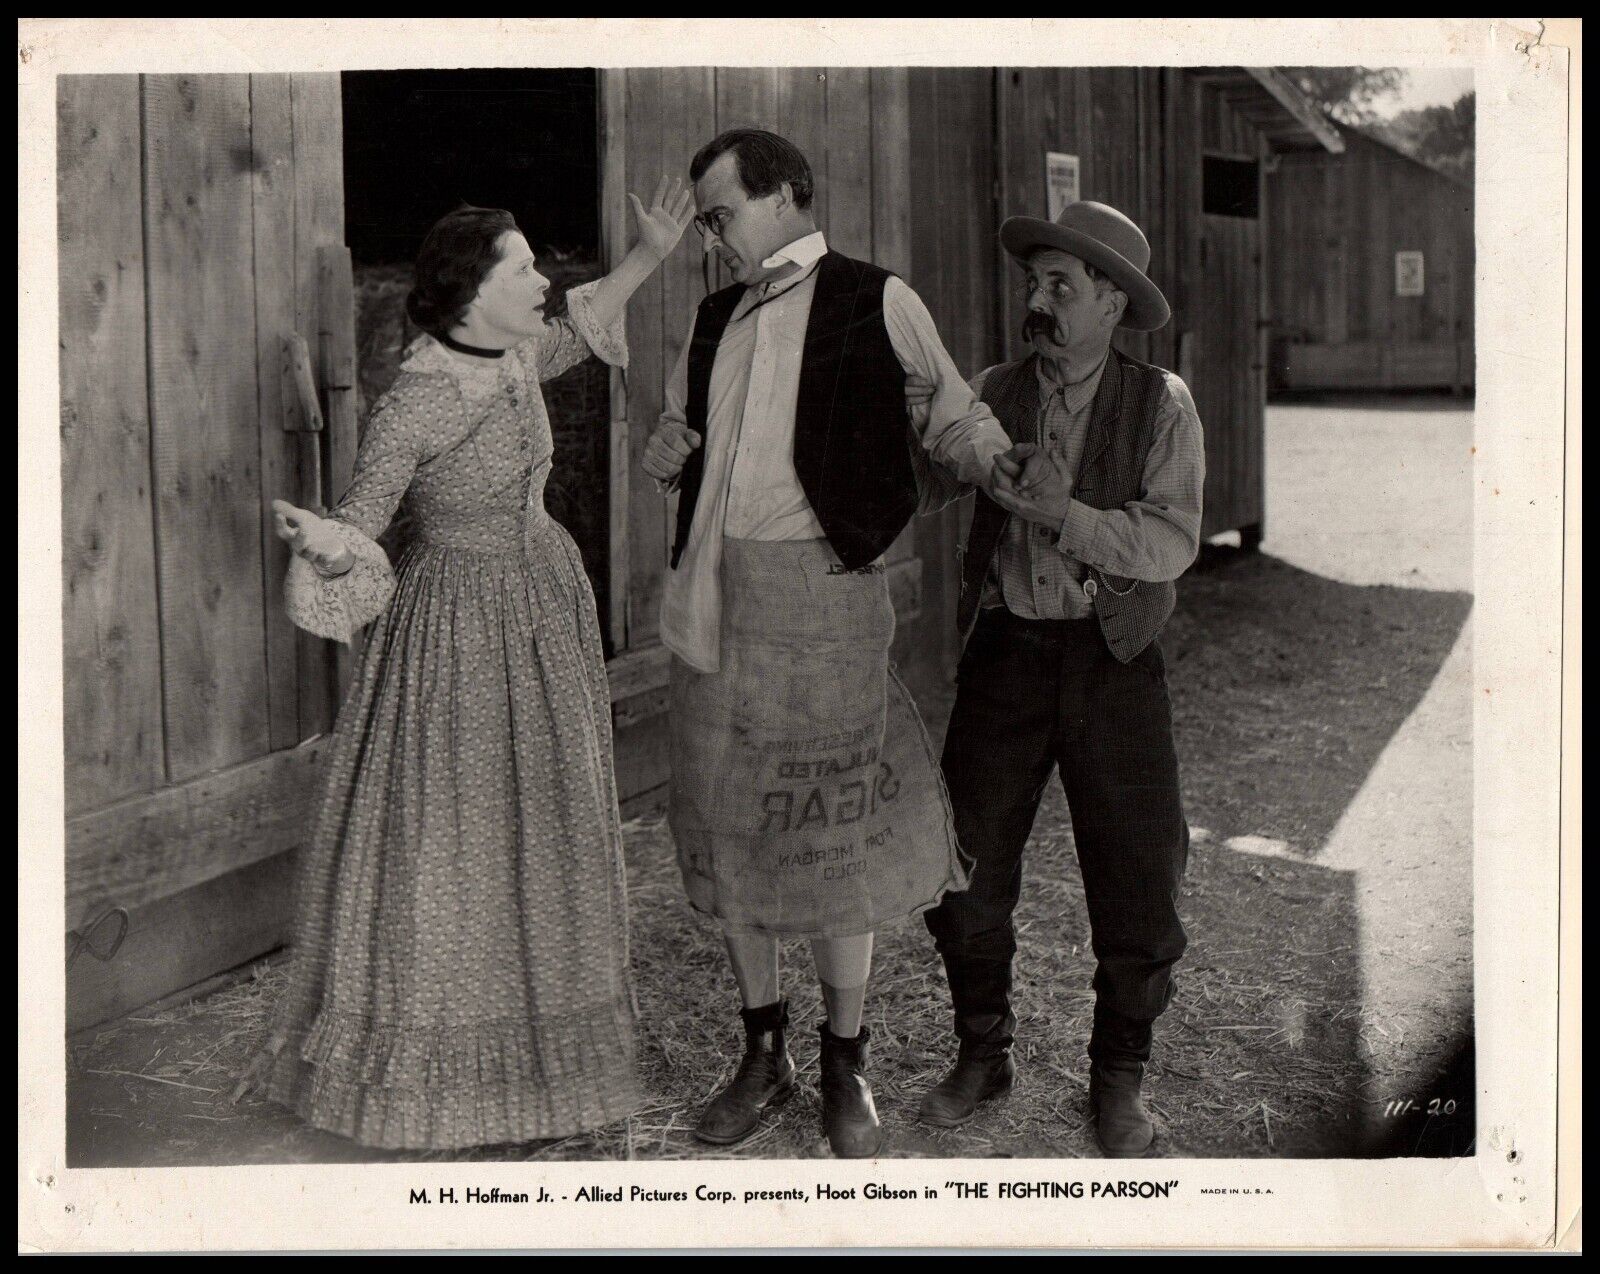 HOOT GIBSON + MARCELINE DAY IN THE FIGHTING PARSON (1933) ORIG VINTAG PHOTO E 26